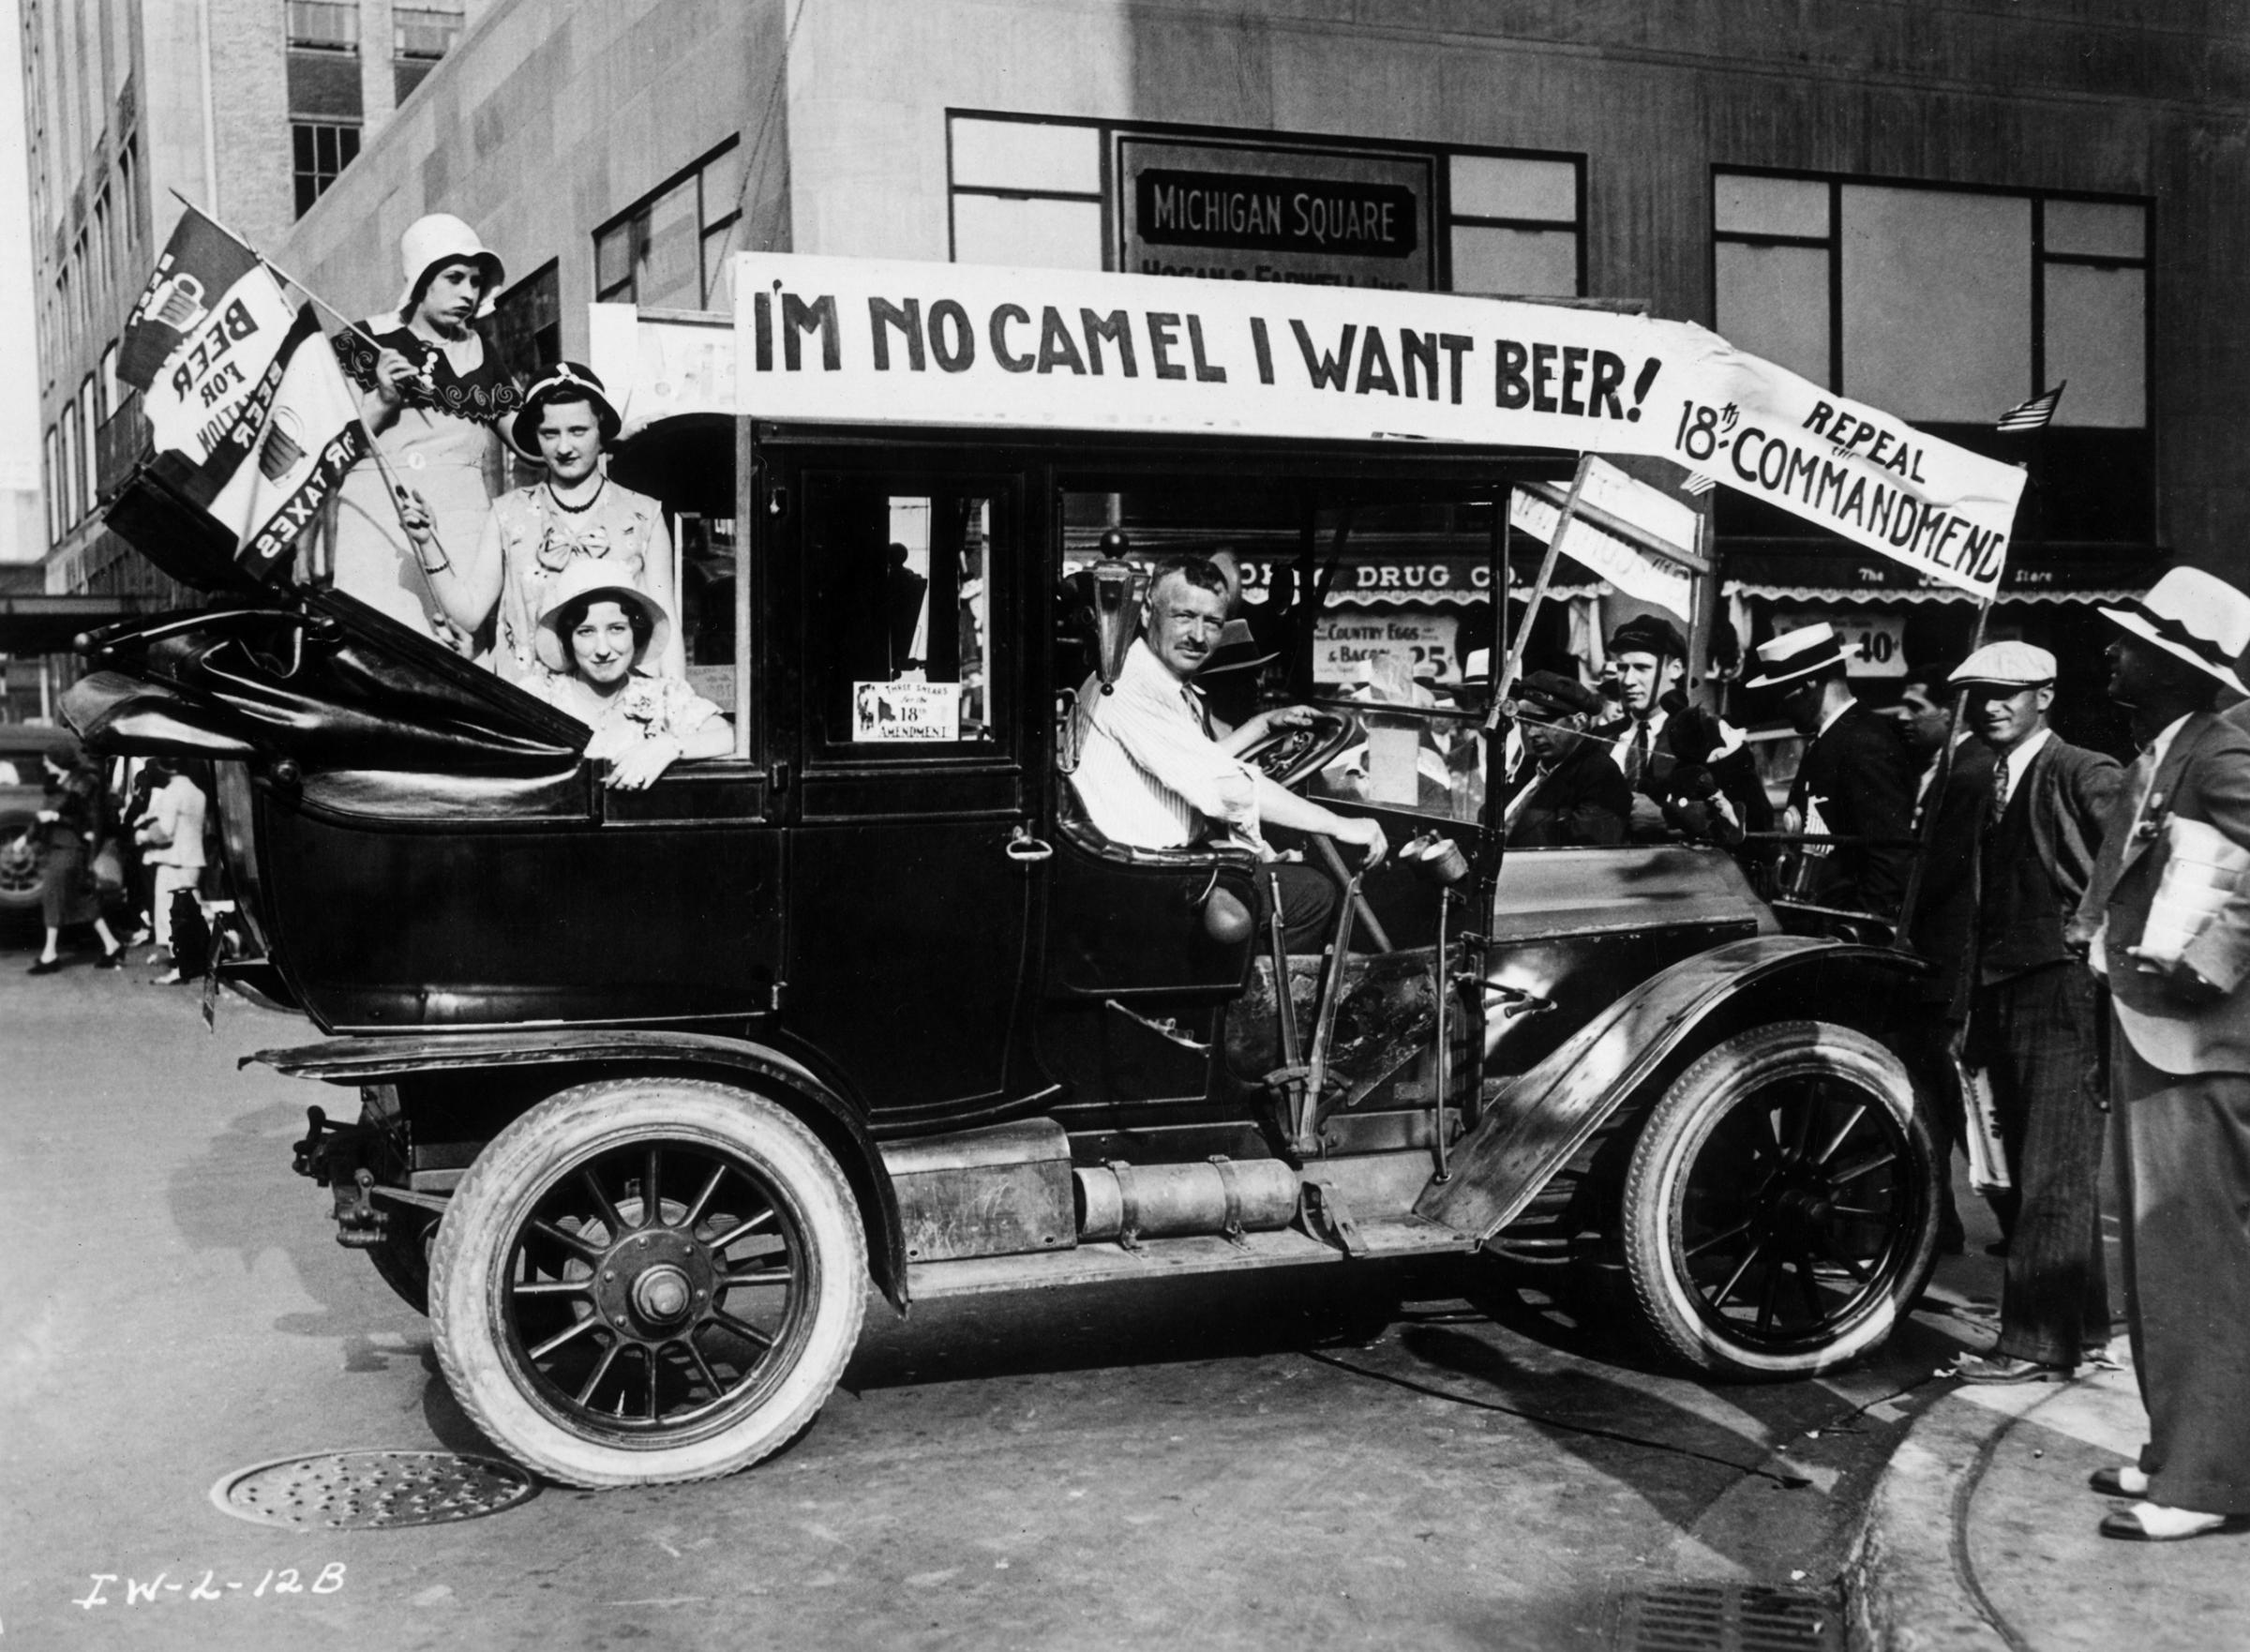 Prohibition protesters parade in a car emblazoned with signs and flags calling for the repeal of the 18th Amendment.